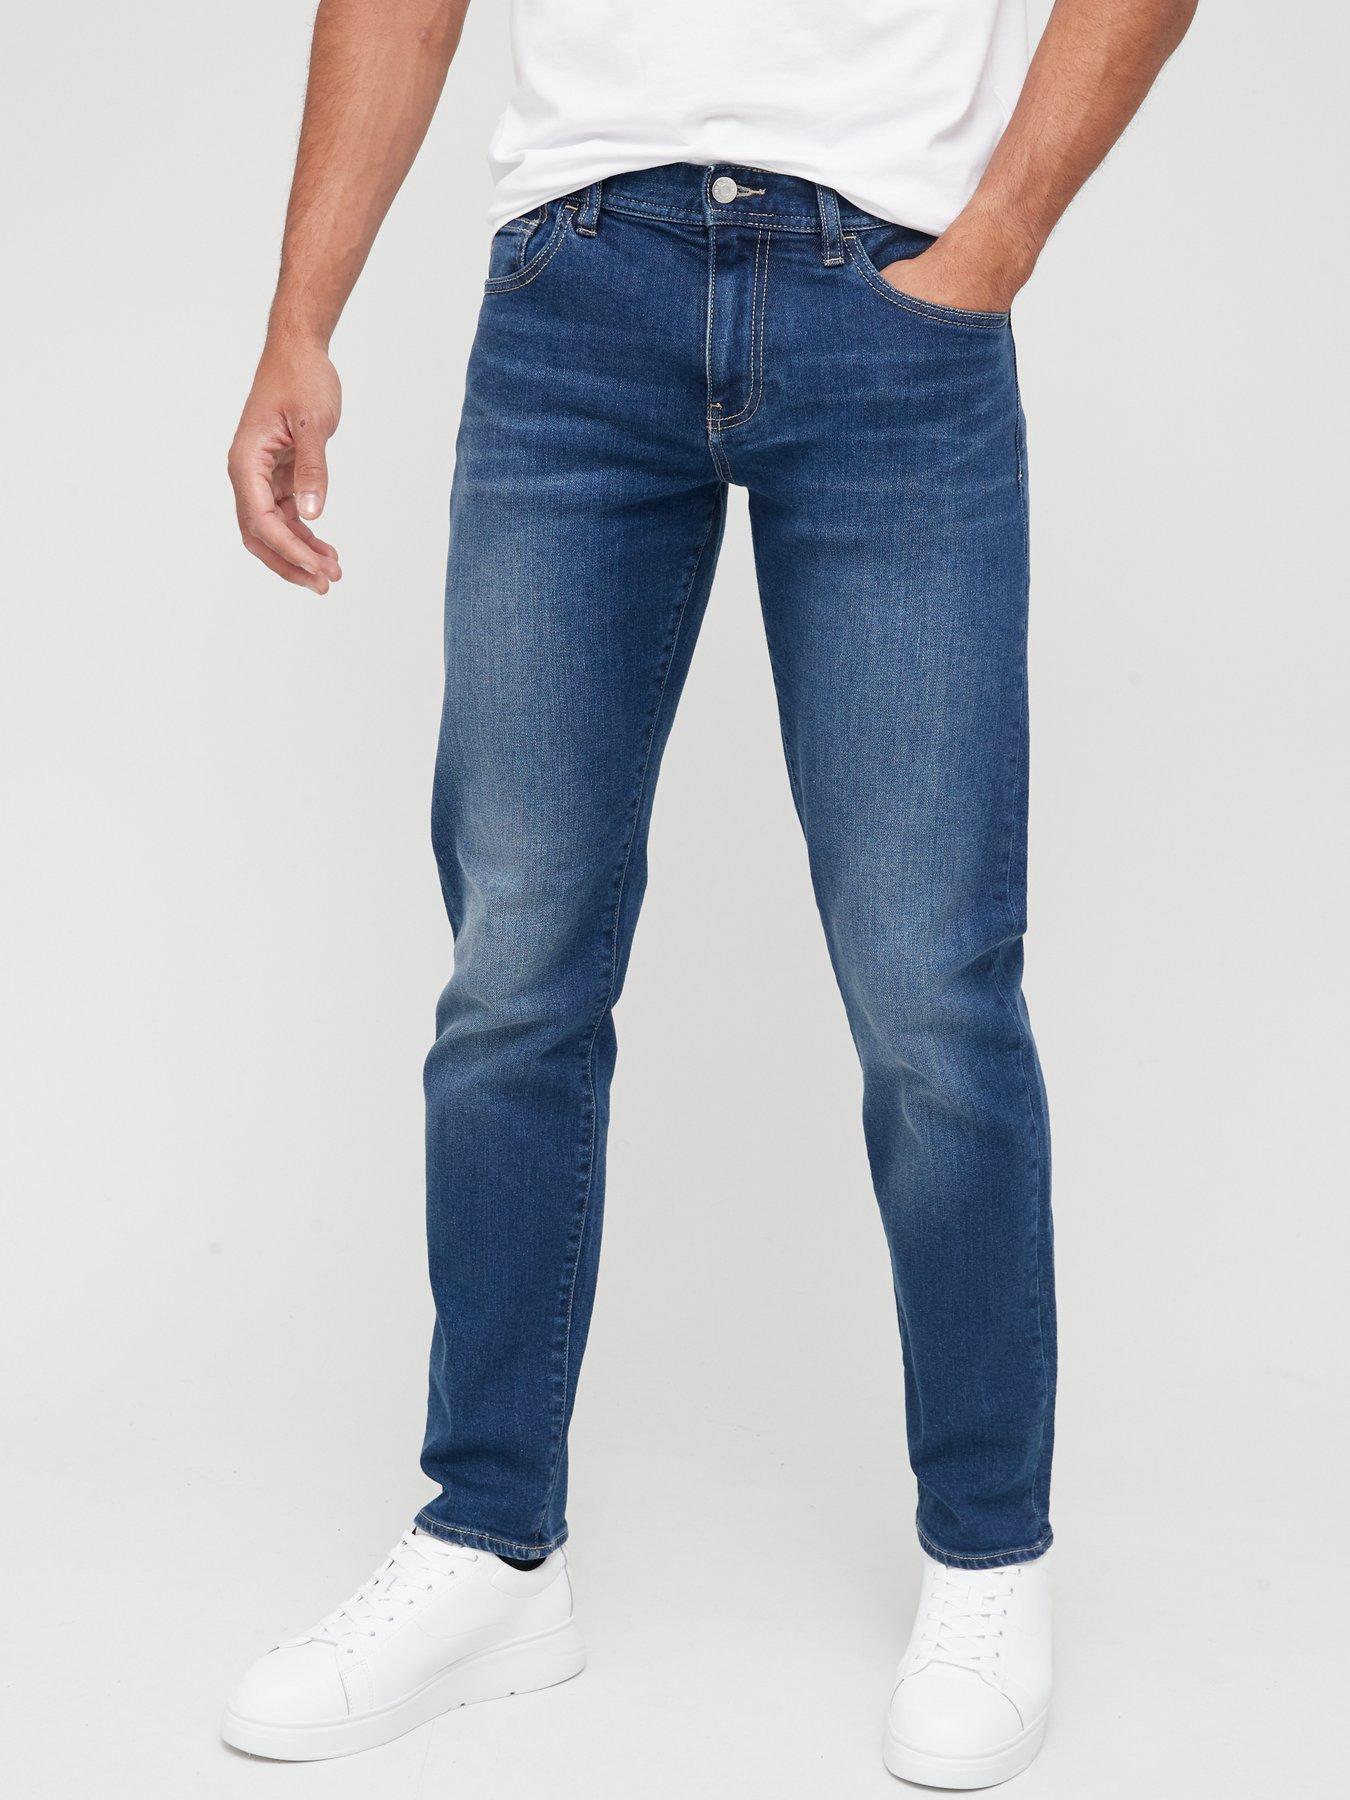 Armani Exchange J16 Straight Fit Jeans - Mid Wash | very.co.uk